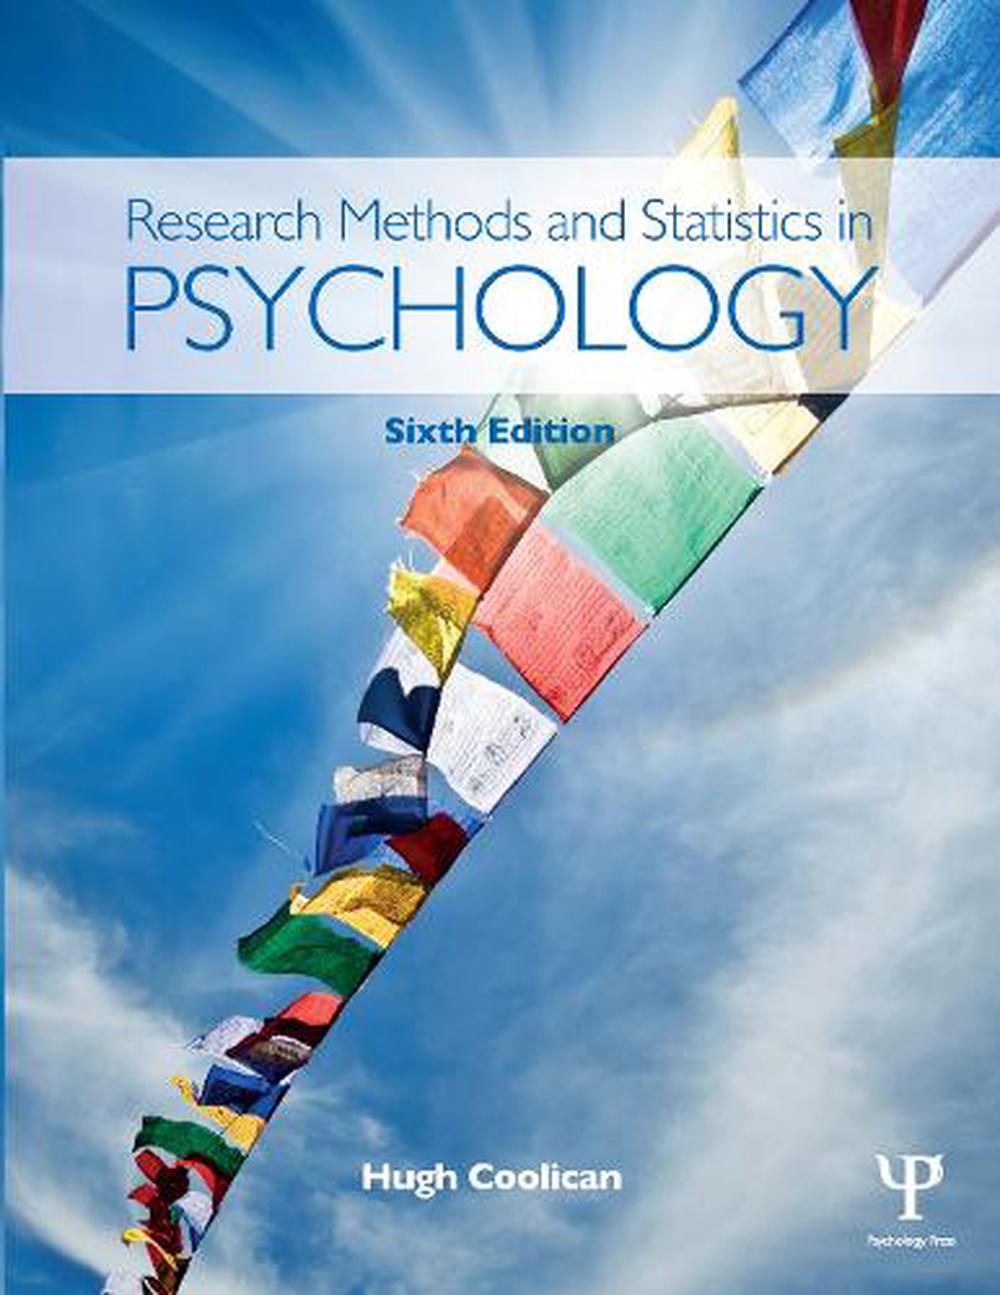 research methods in psychology textbook price